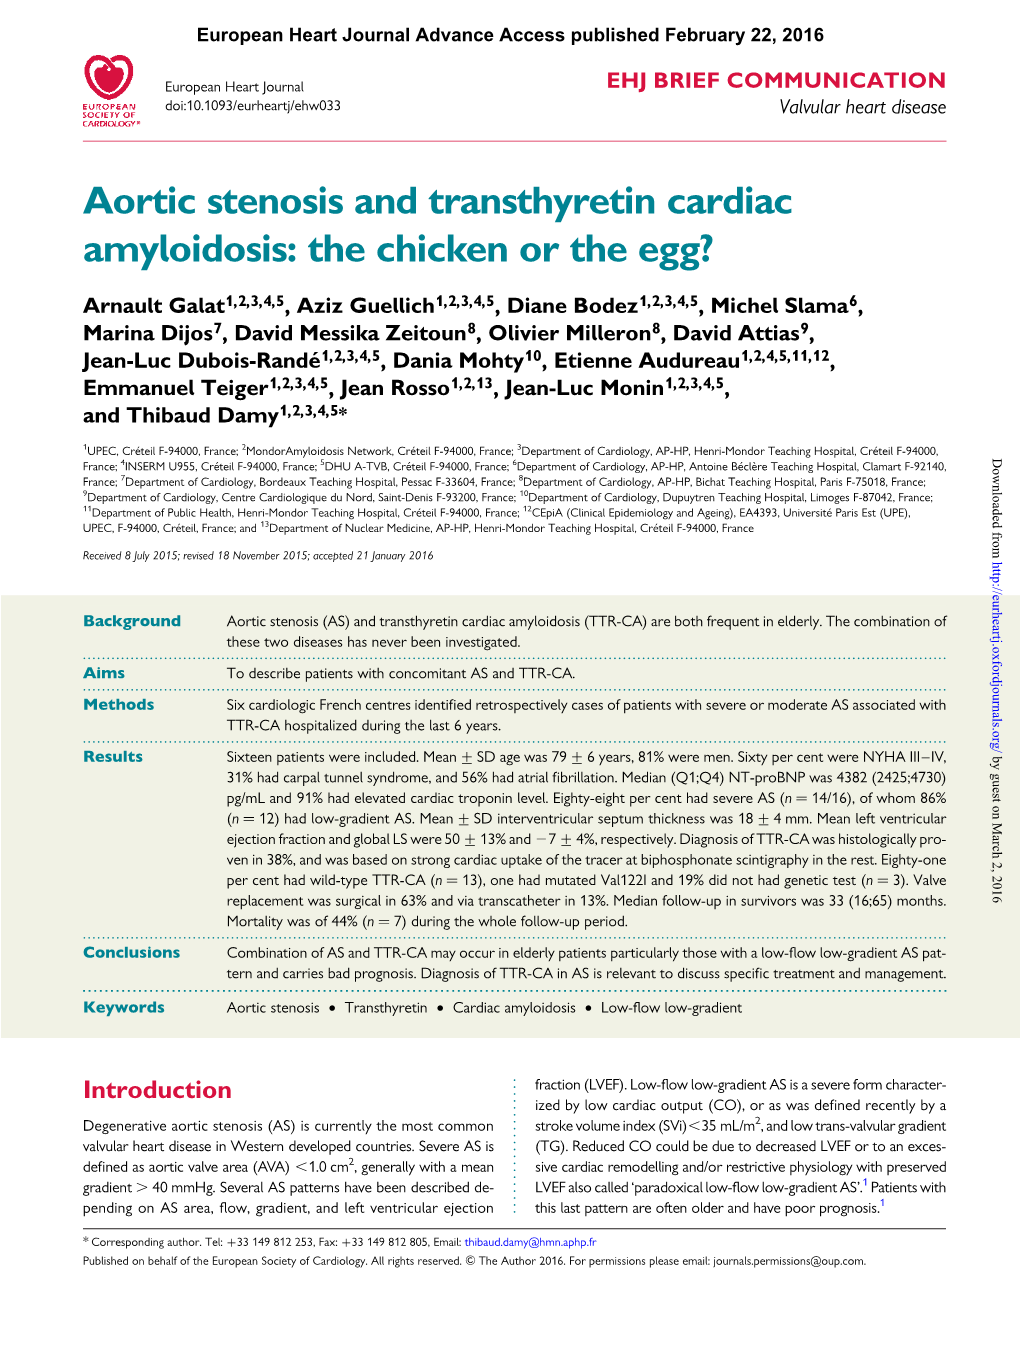 Aortic Stenosis and Transthyretin Cardiac Amyloidosis: the Chicken Or the Egg?